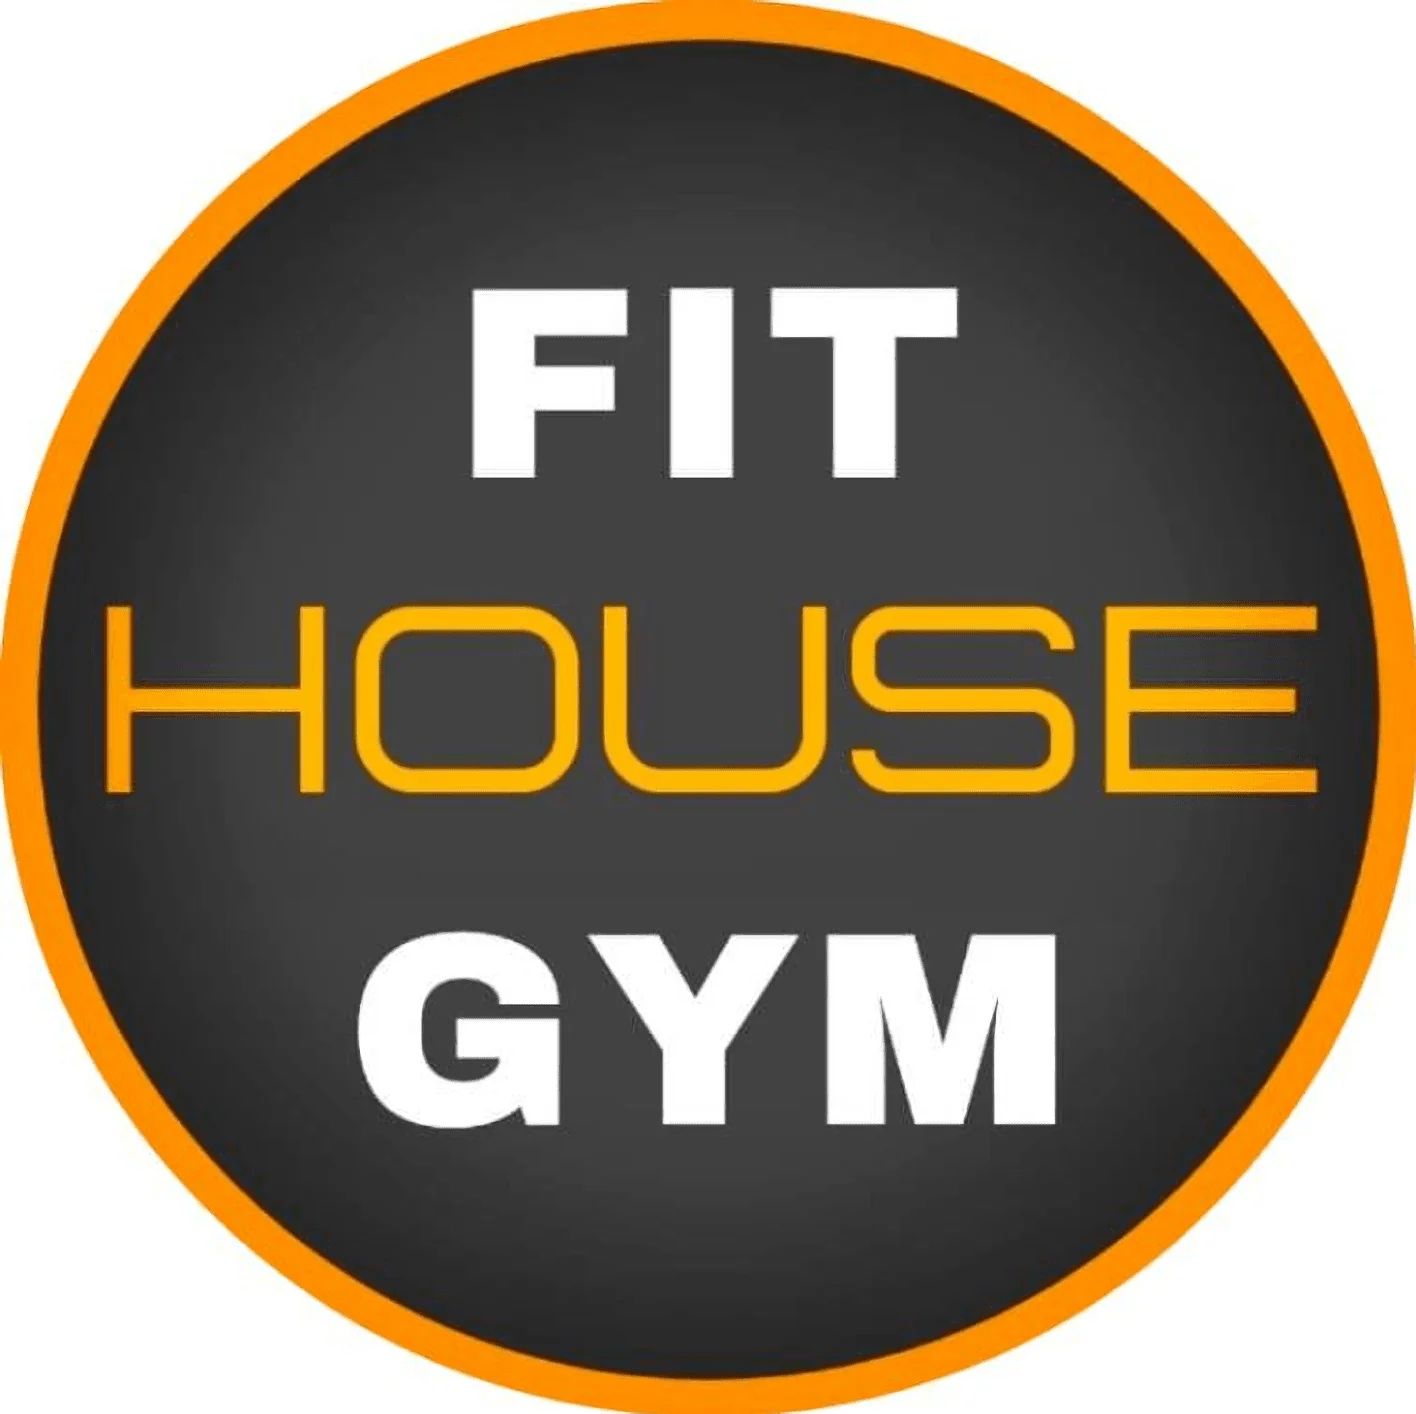 Fit House Gym Uio-1145